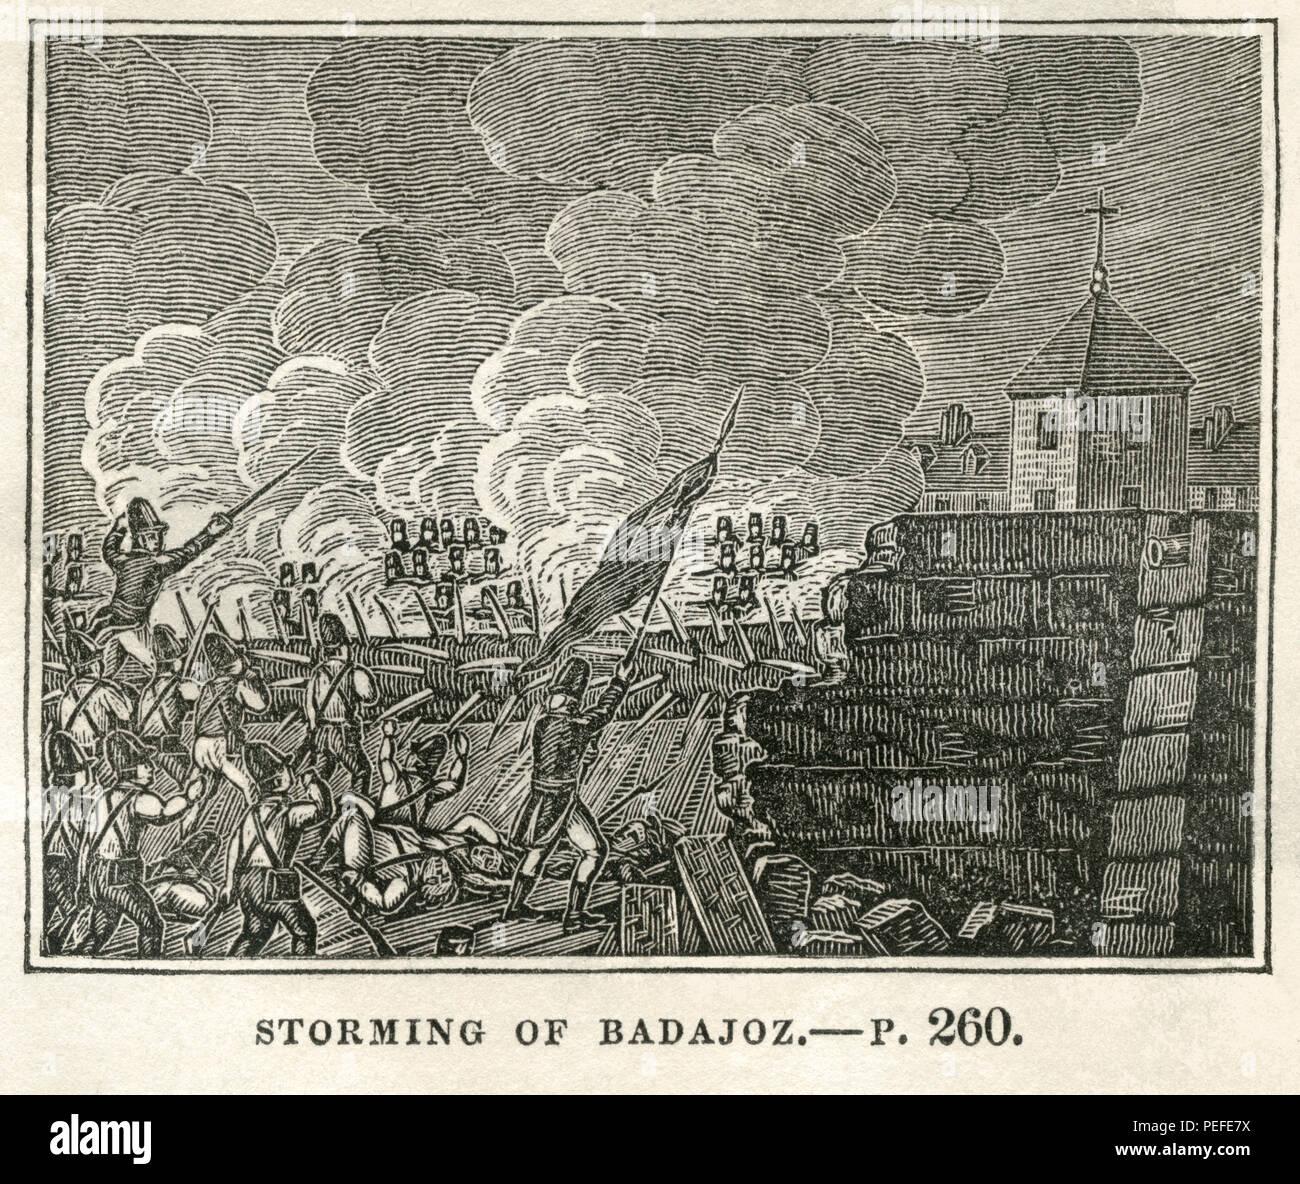 Storming of Badajoz, 1812, Illustration from the Book, Historical Cabinet, L.H. Young Publisher, New Haven, 1834 Stock Photo